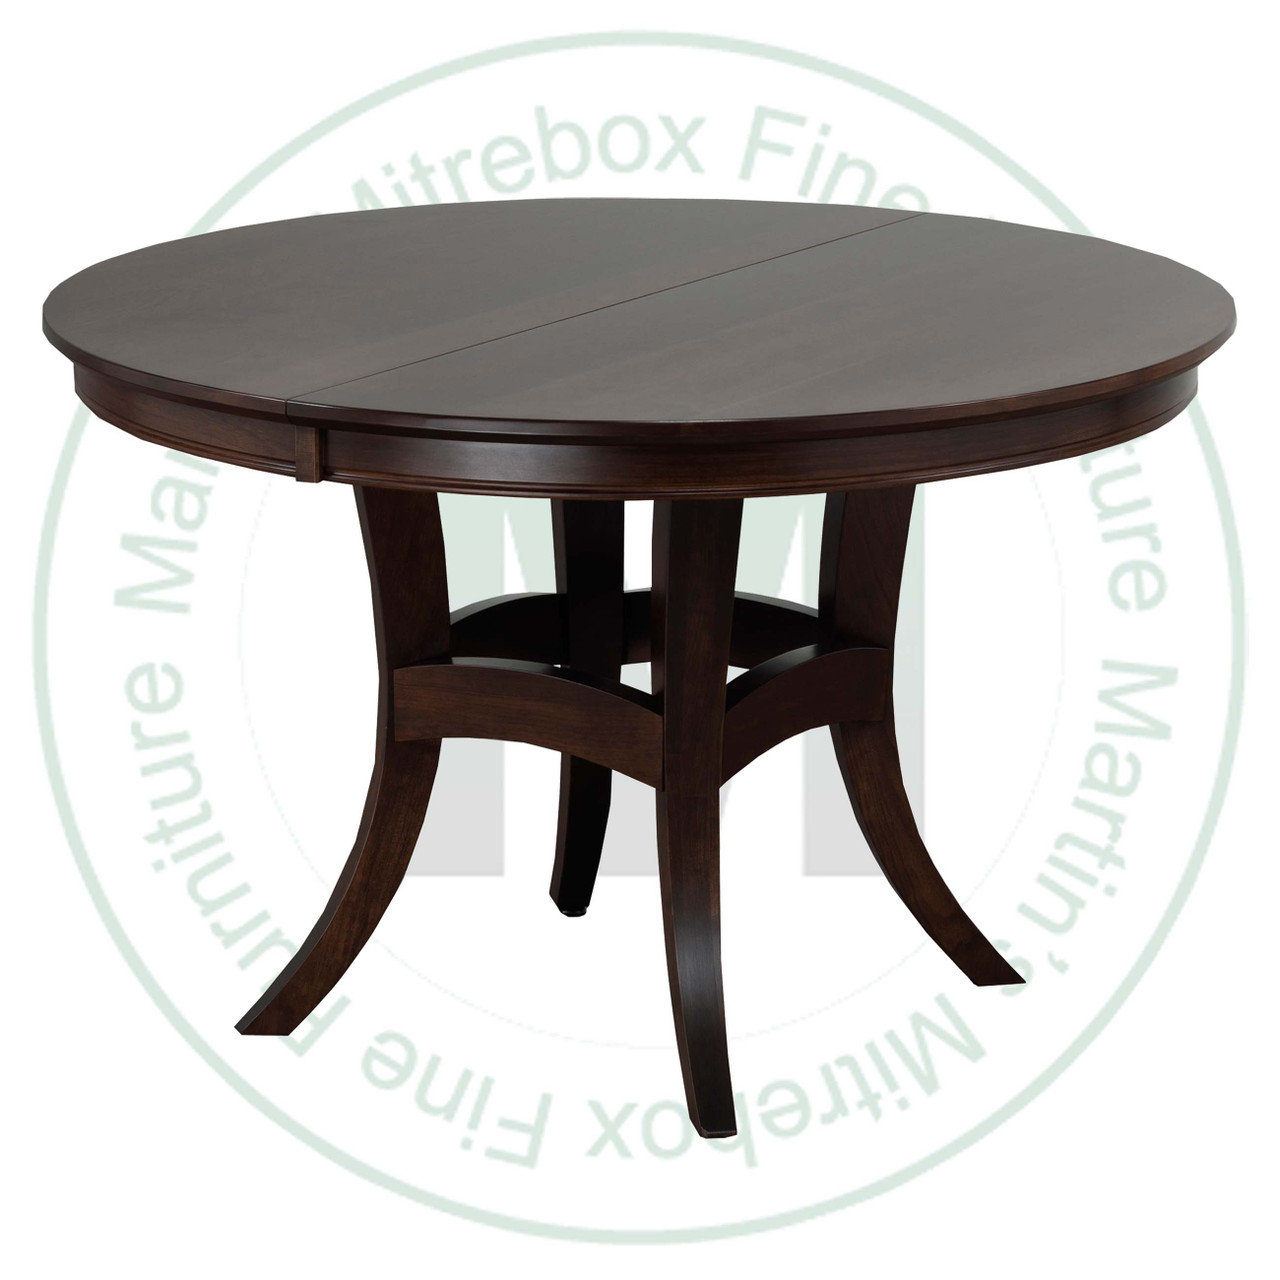 Maple Beijing Single Pedestal Table 60''D x 60''W x 30''H With Solid Top